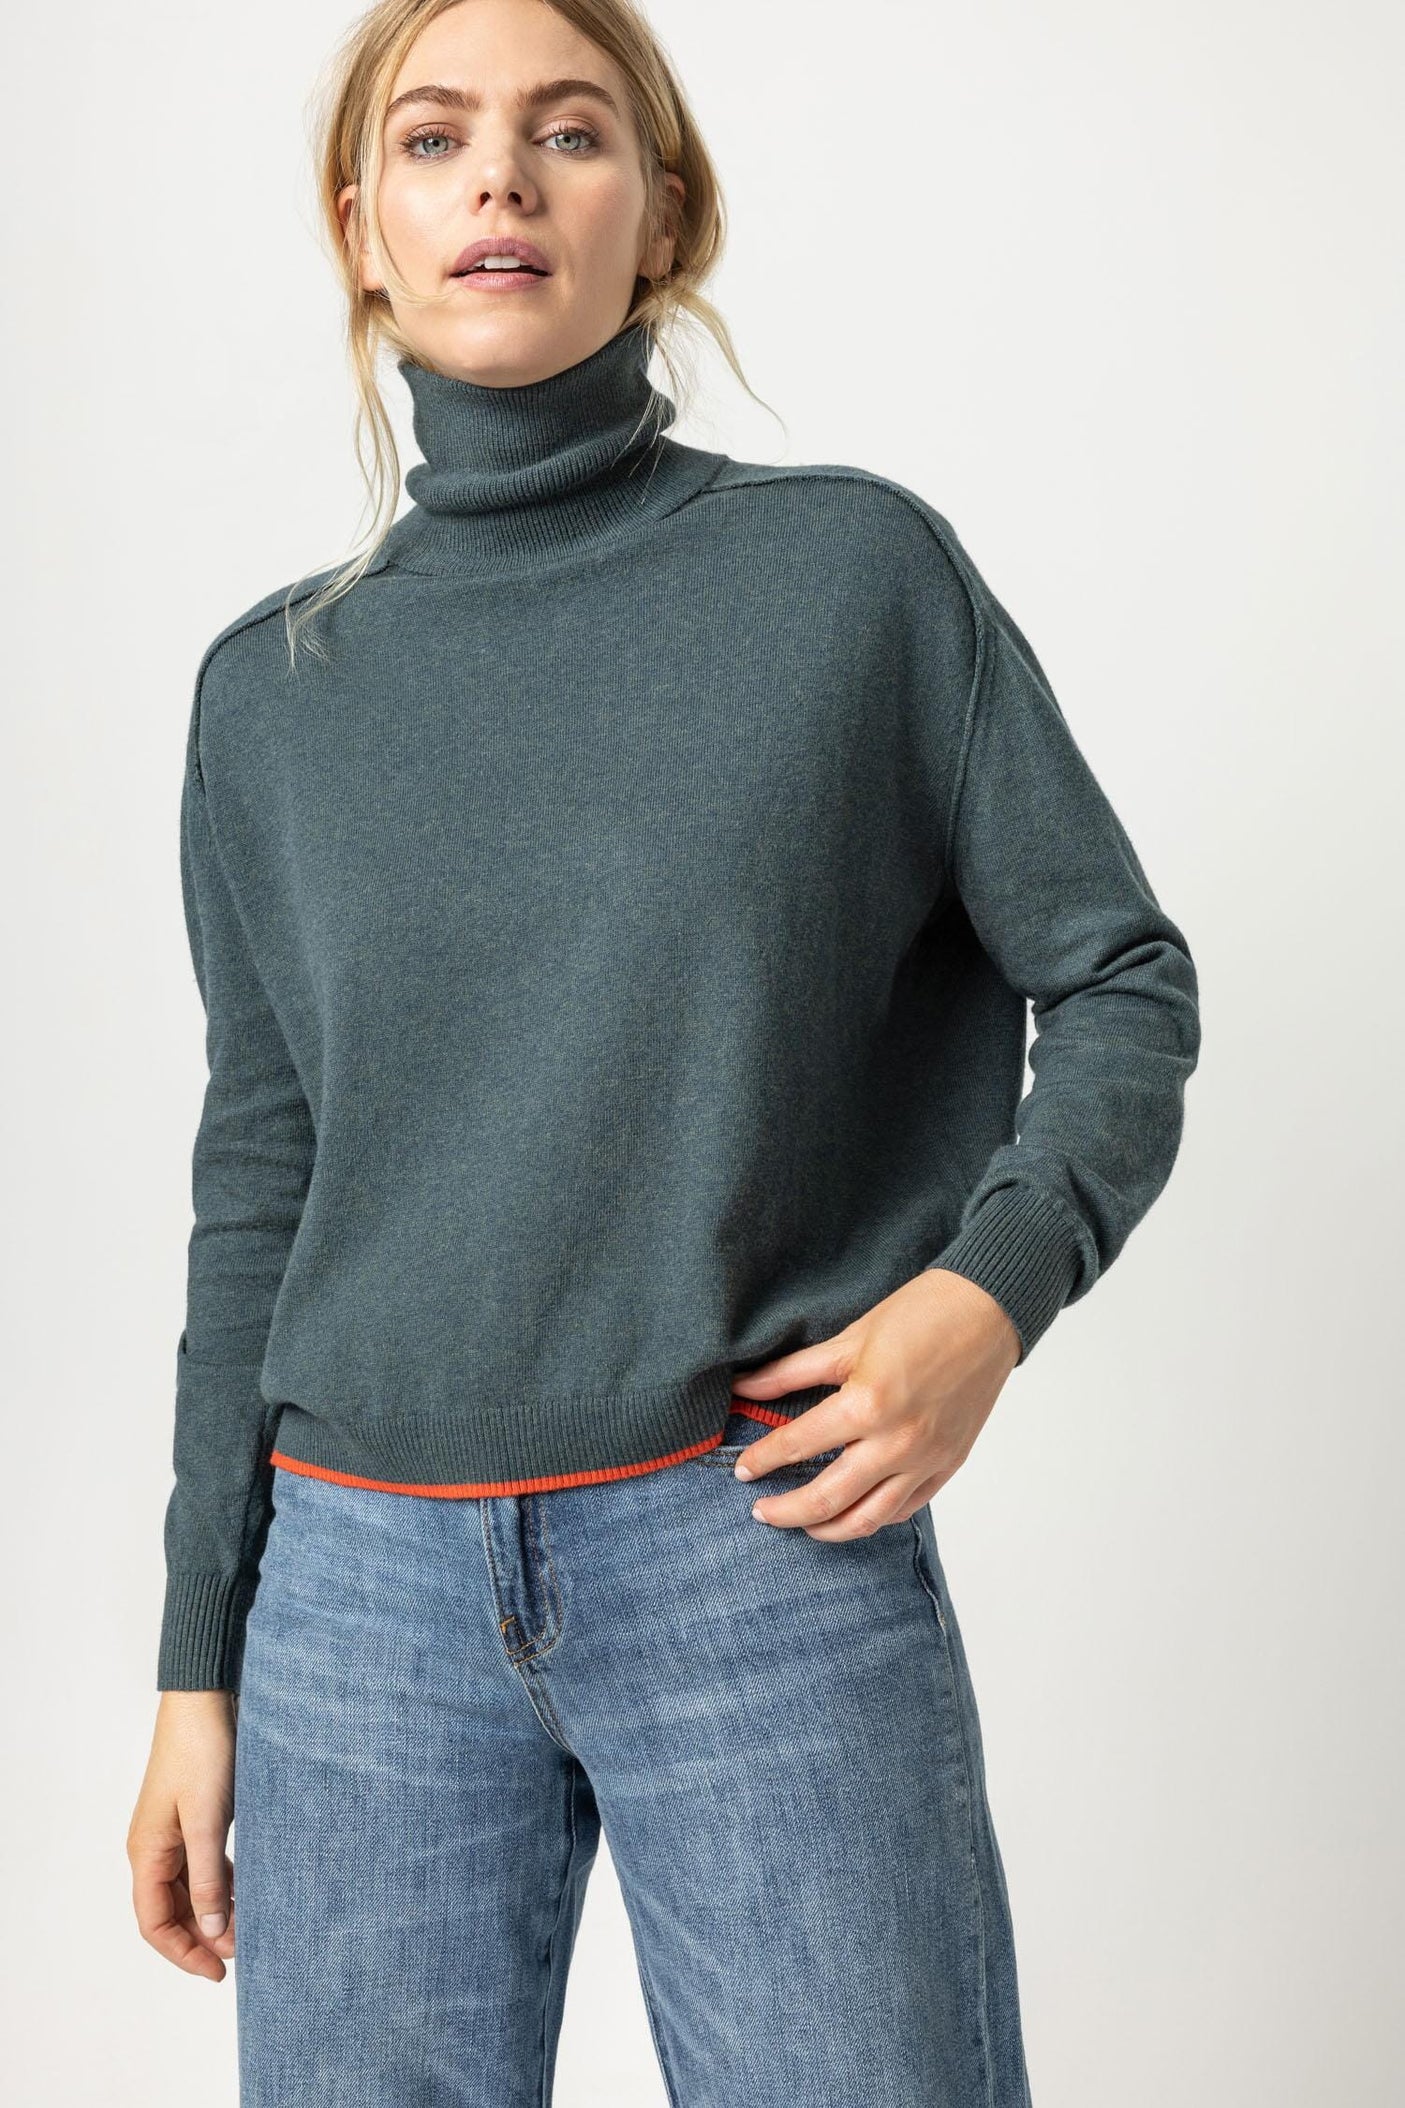 Easy Turtleneck Sweater with Tipping in Spruce